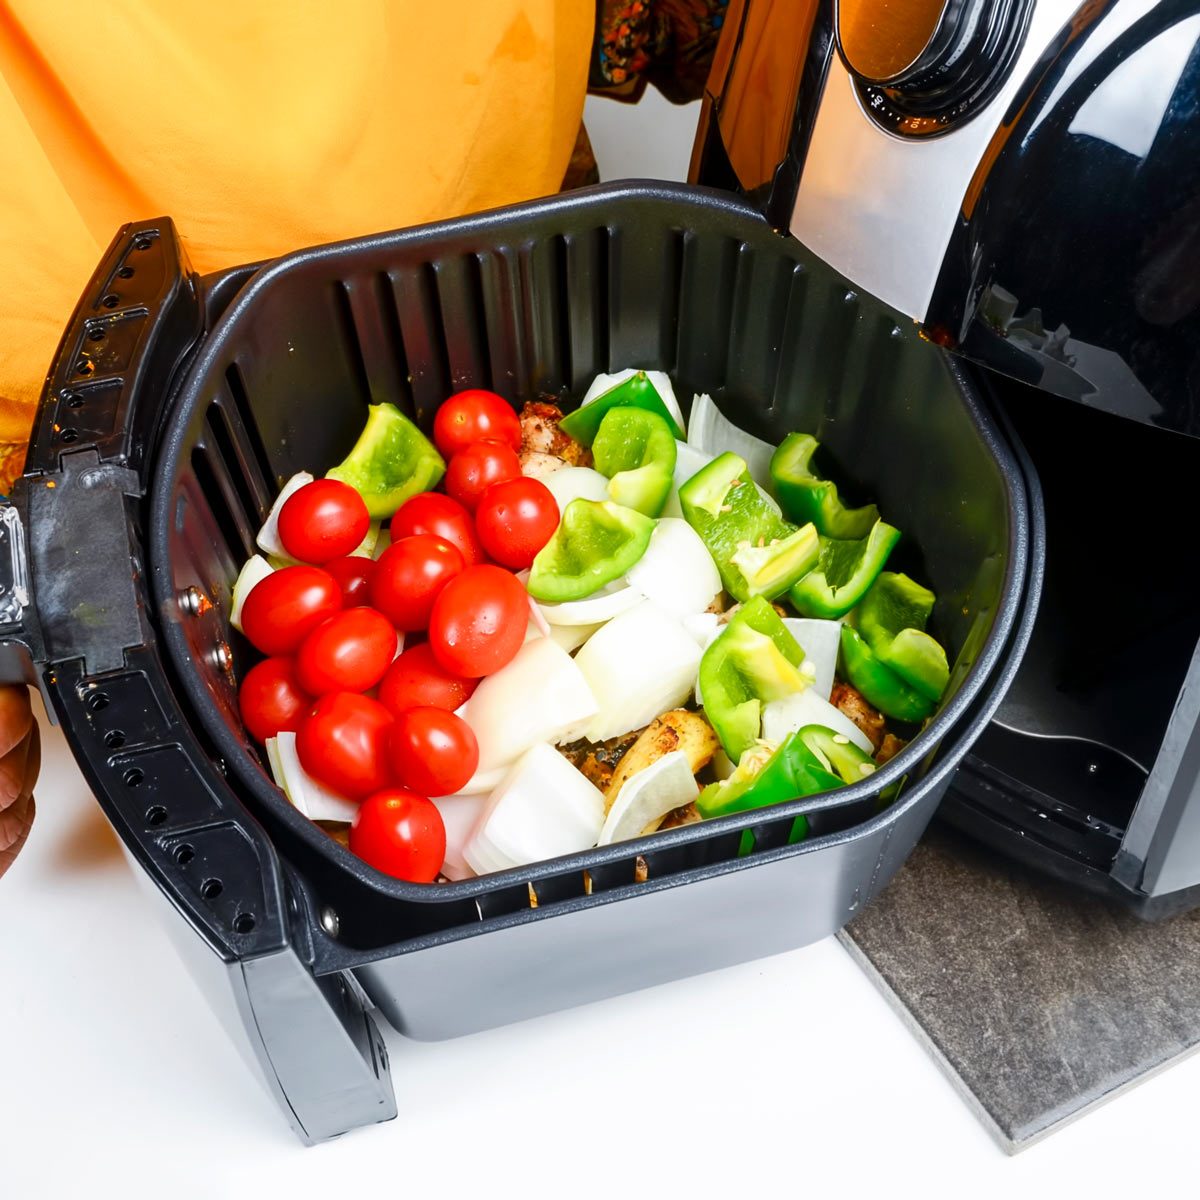 Is It Healthier to Use an Air Fryer?